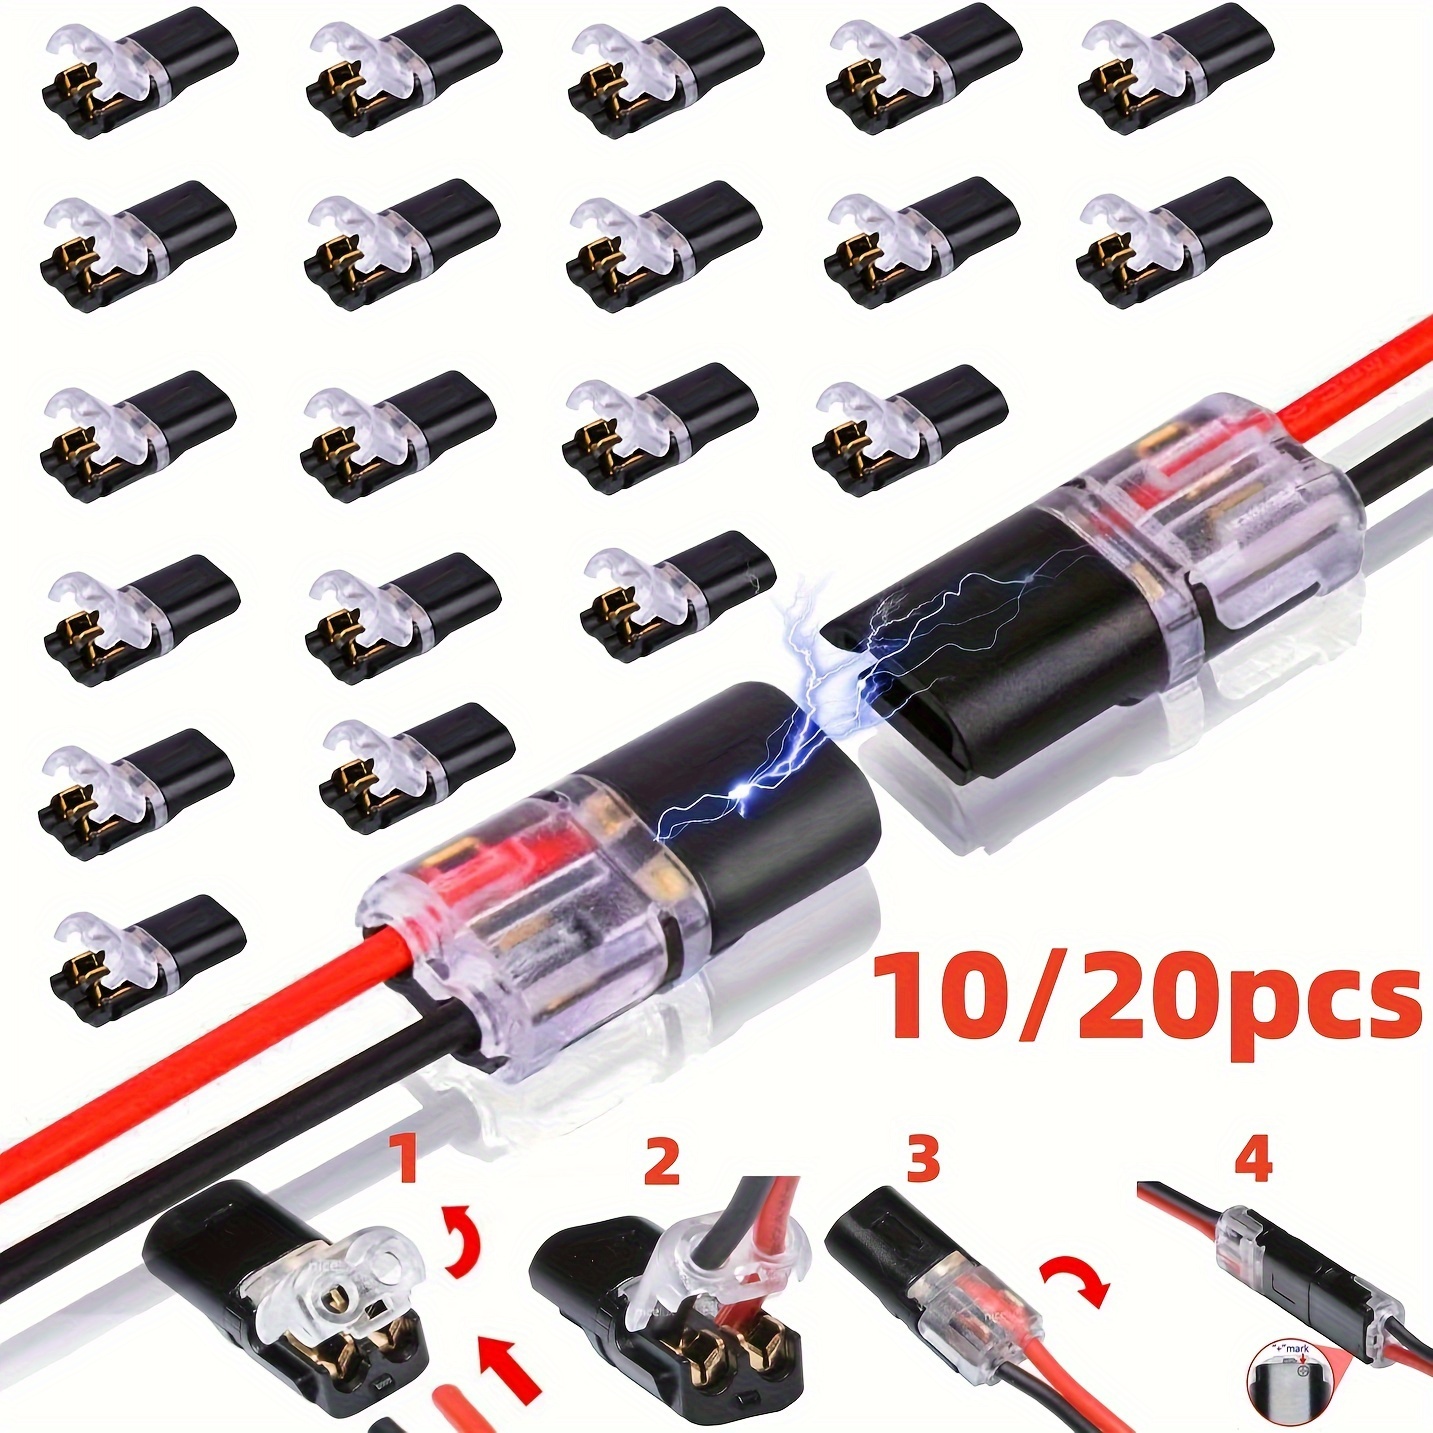 

10pcs/20pcs Double-wire Plug-in Connector With Locking Buckle, Pluggable Led Wire Connectors, 2 Pin 2 Way Universal Compact Wire Terminals, No Wire-stripping Required